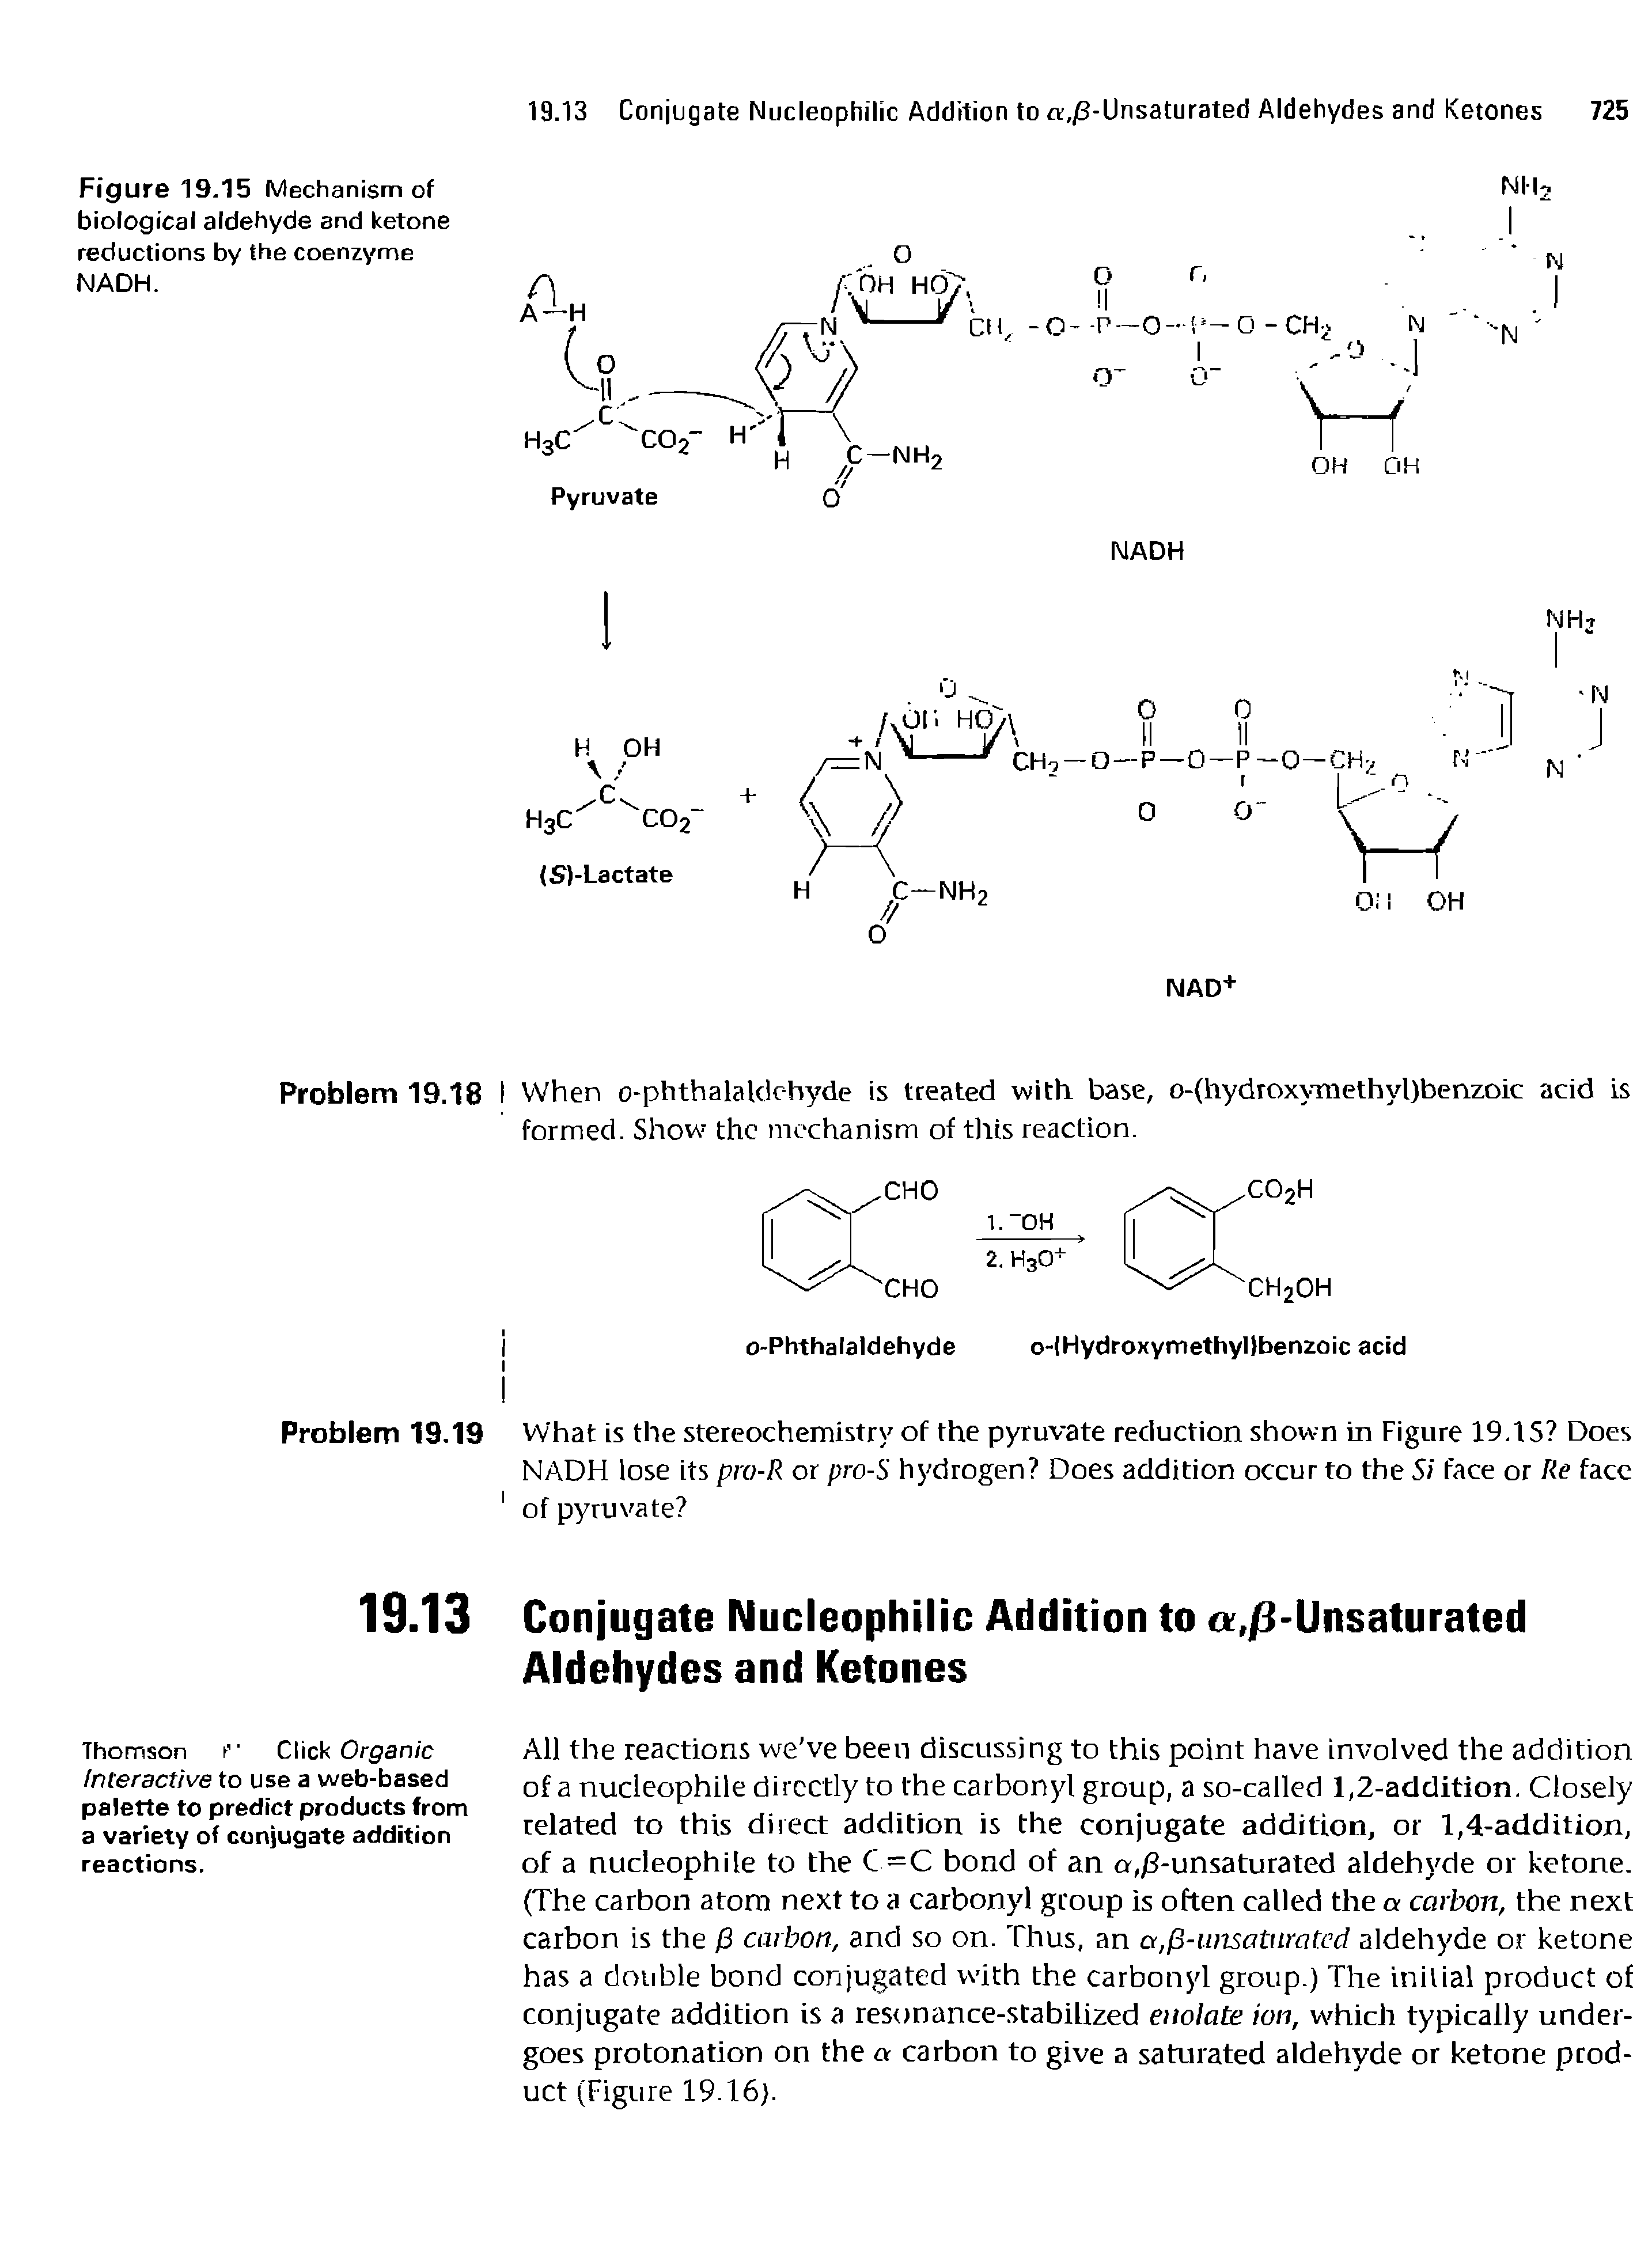 Figure 19.15 Mechanism of biological aldehyde and ketone reductions by the coenzyme NADH.